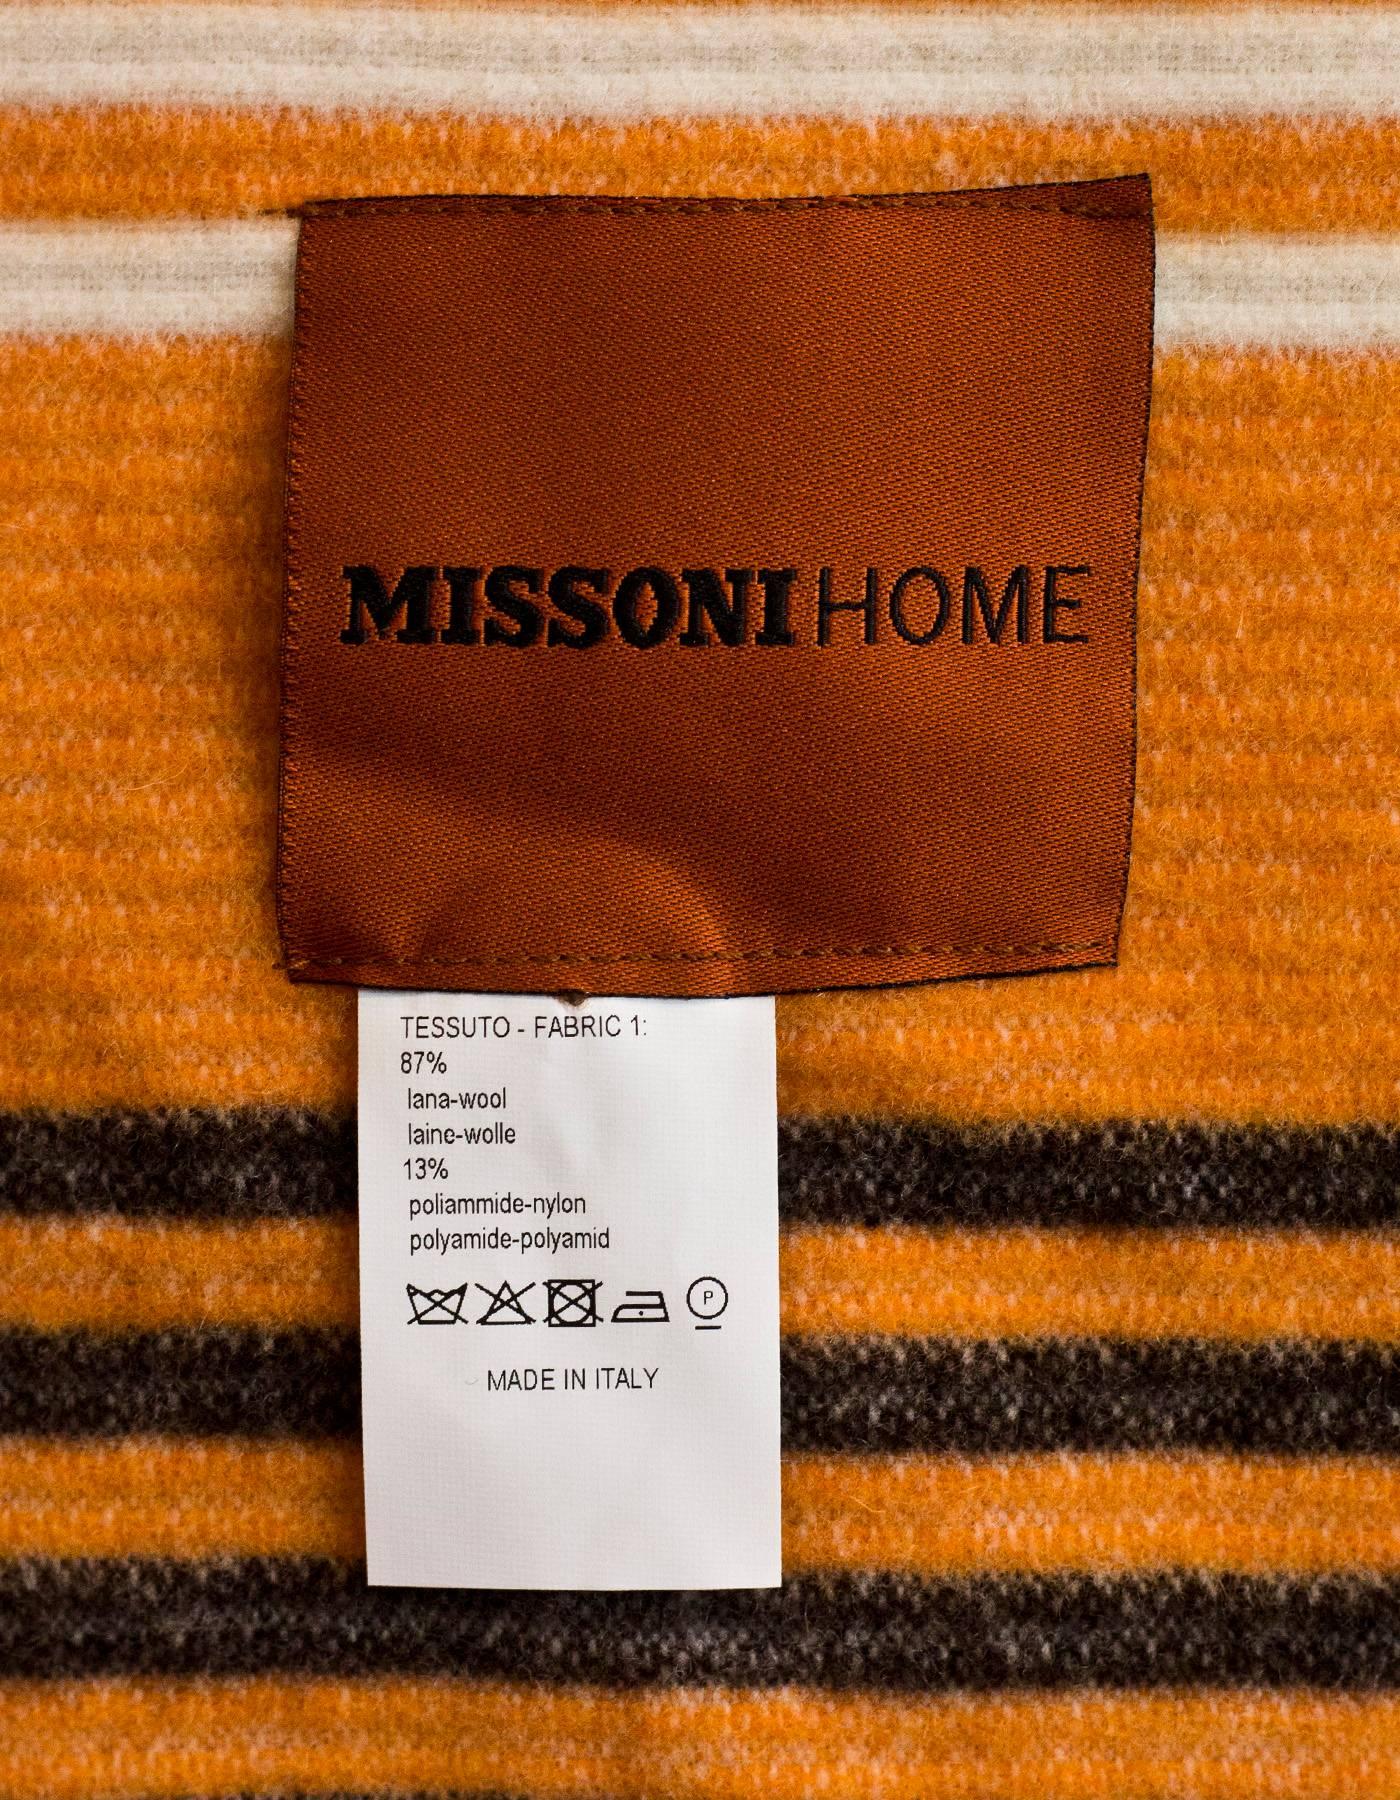 Missoni Home Multi-Colored Ruggero Throw Blanket

Made In: Italy
Color: Multi
Composition: 87% Wool, 13% Nylon
Retail Price: $460 + tax
Overall Condition: Excellent pre-owned condition
Included: Missoni Home box

Measurements:
Length: 72